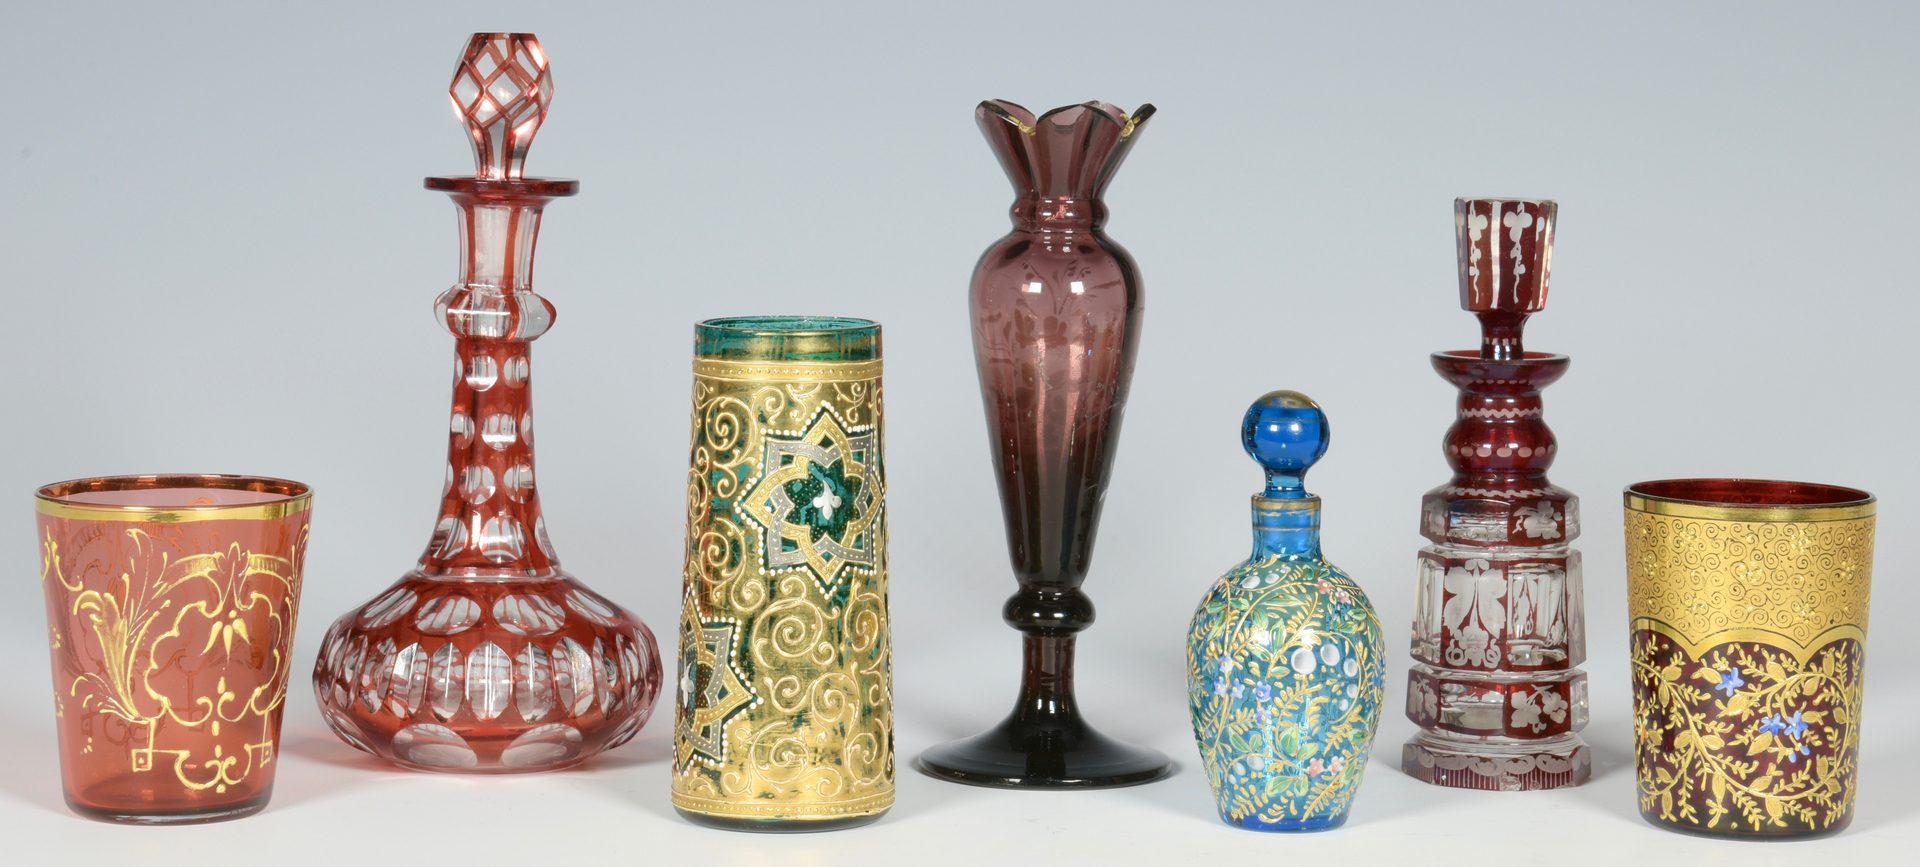 Lot 685: 7 Colored Glass Perfume Bottles and Cups